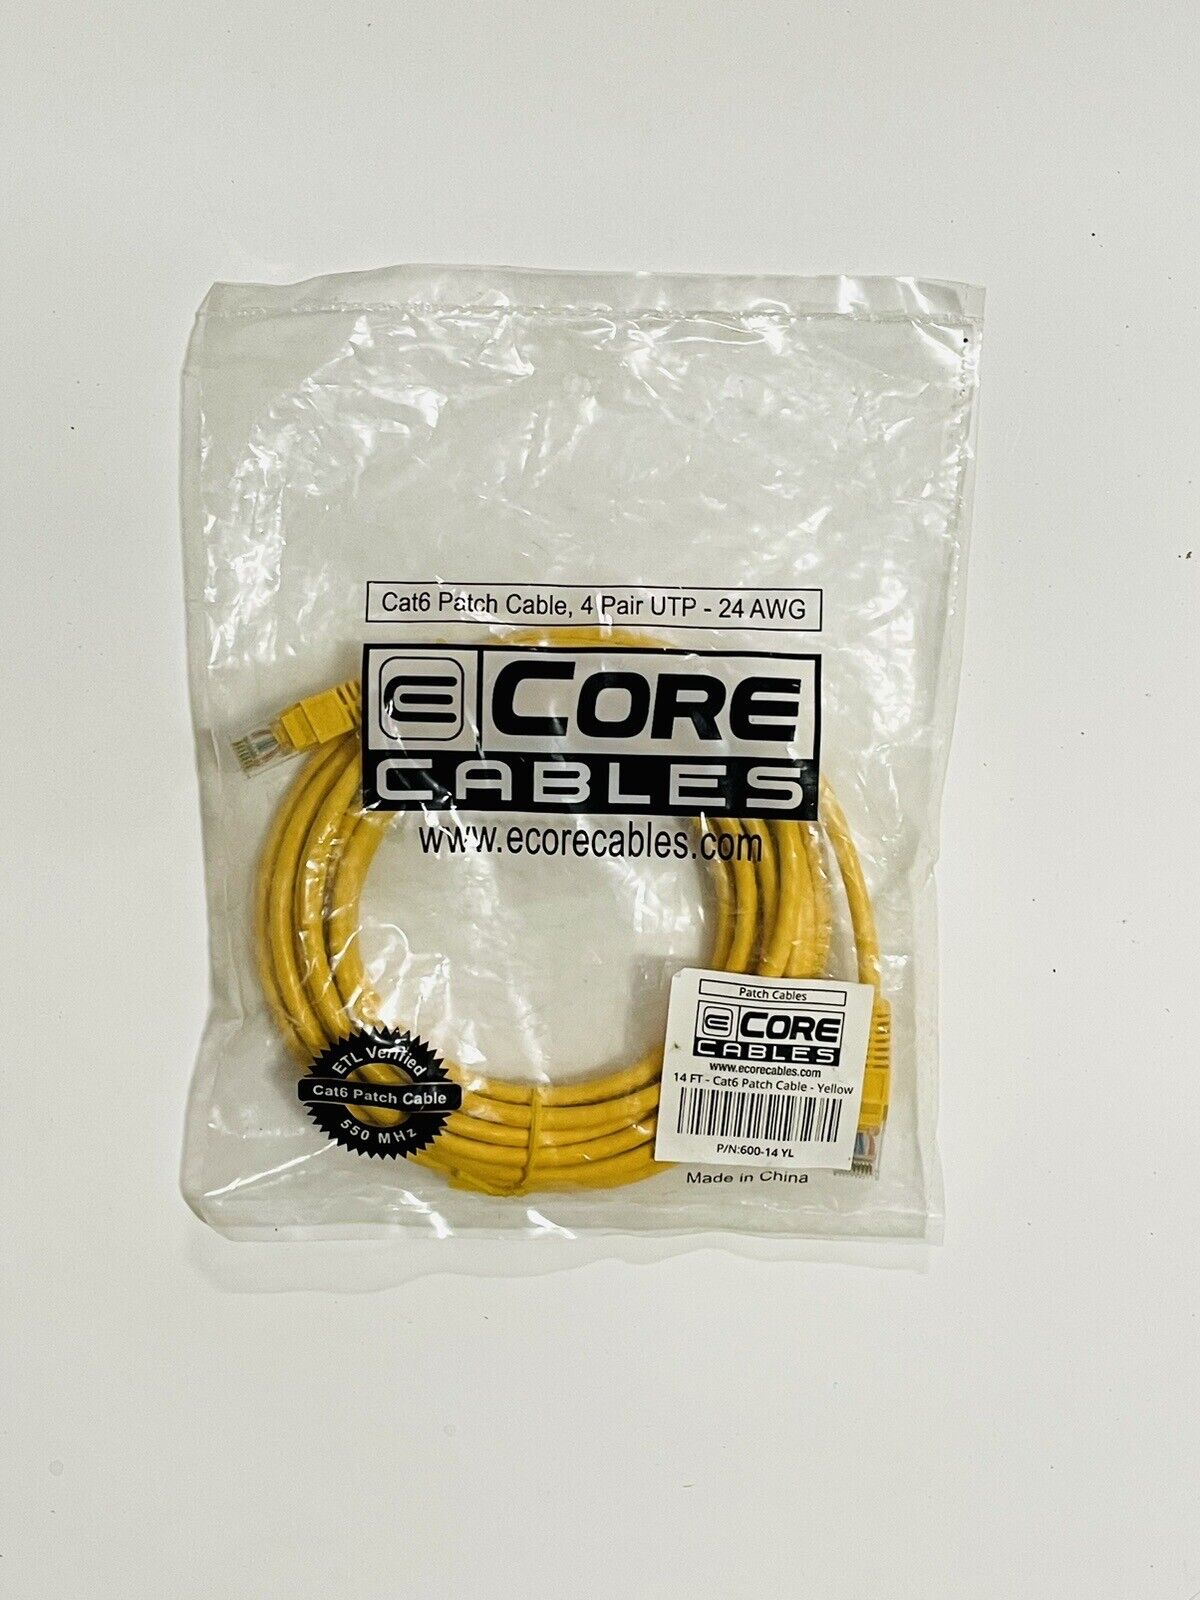 Core Cables Cat6 Patch Cable 4 Pair UTP 24 AWG Yellow Vintage New